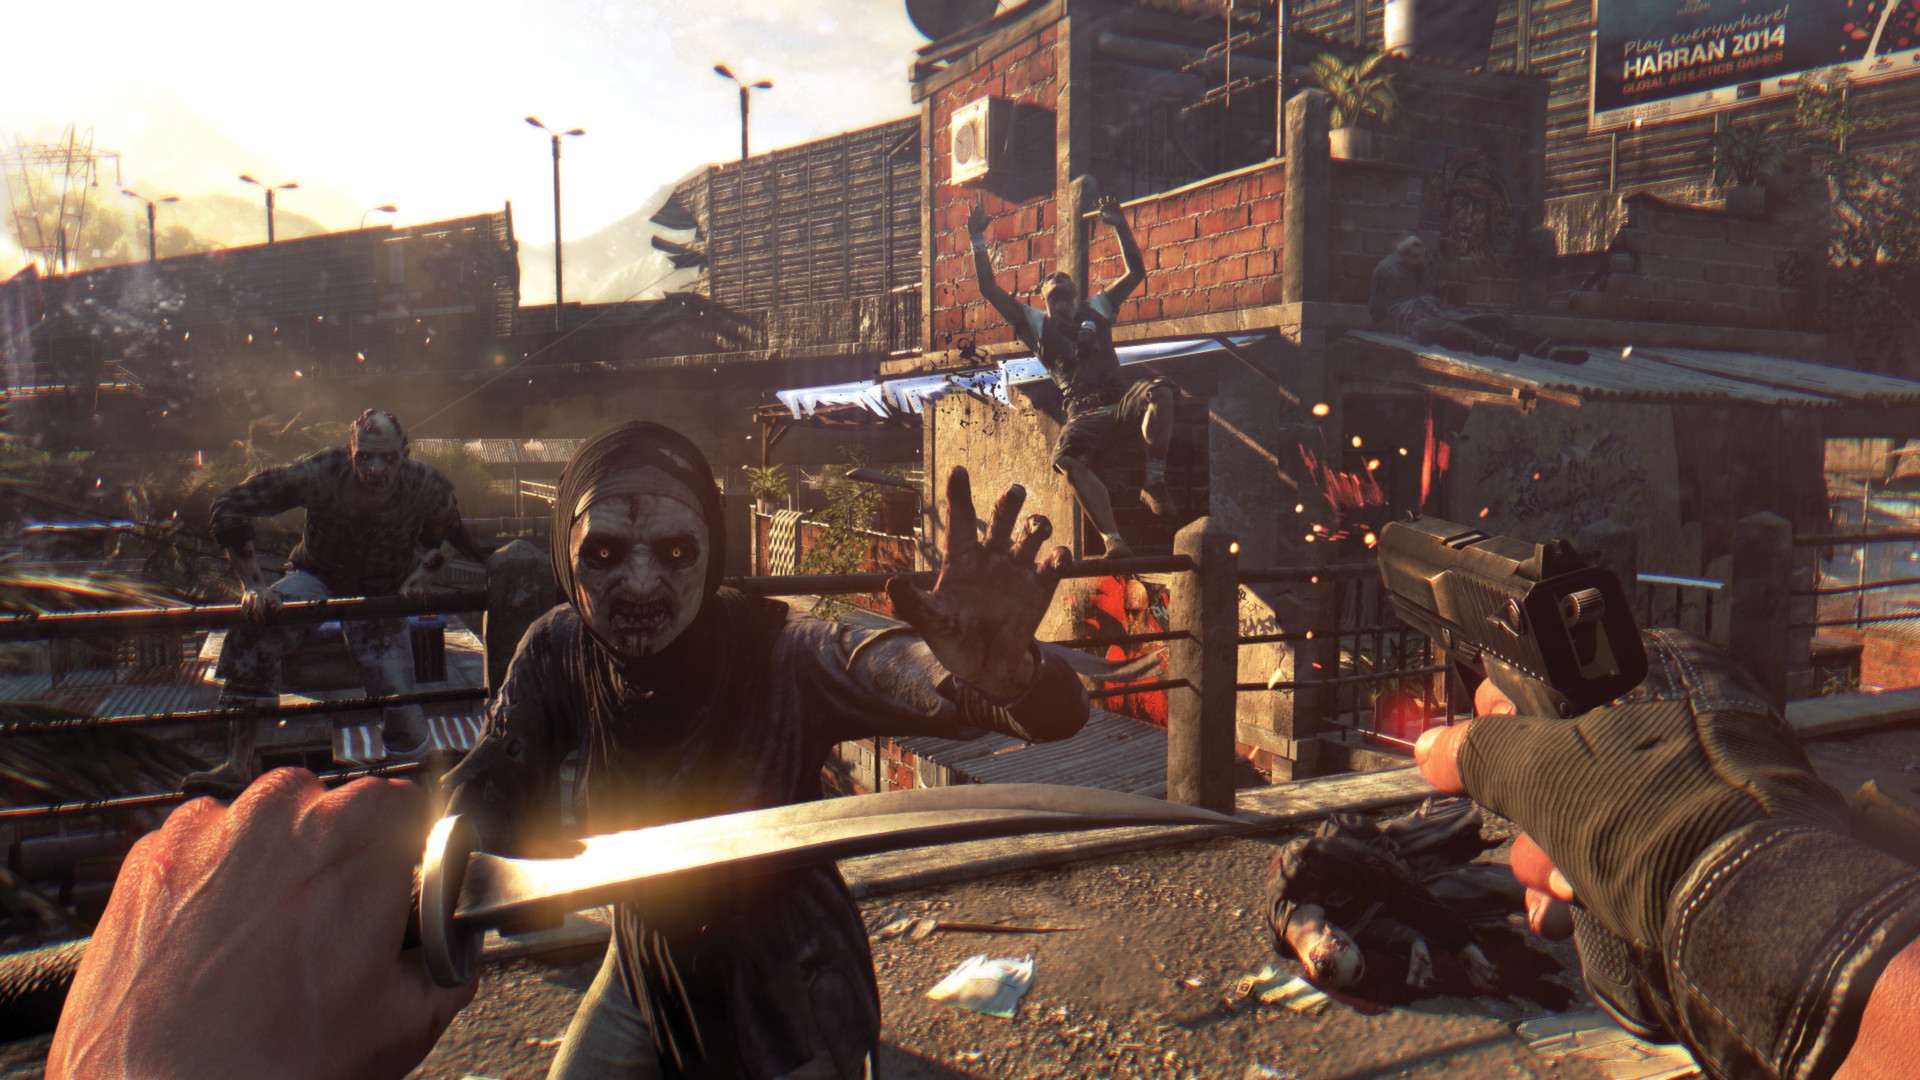 dying light 2 pc requirements